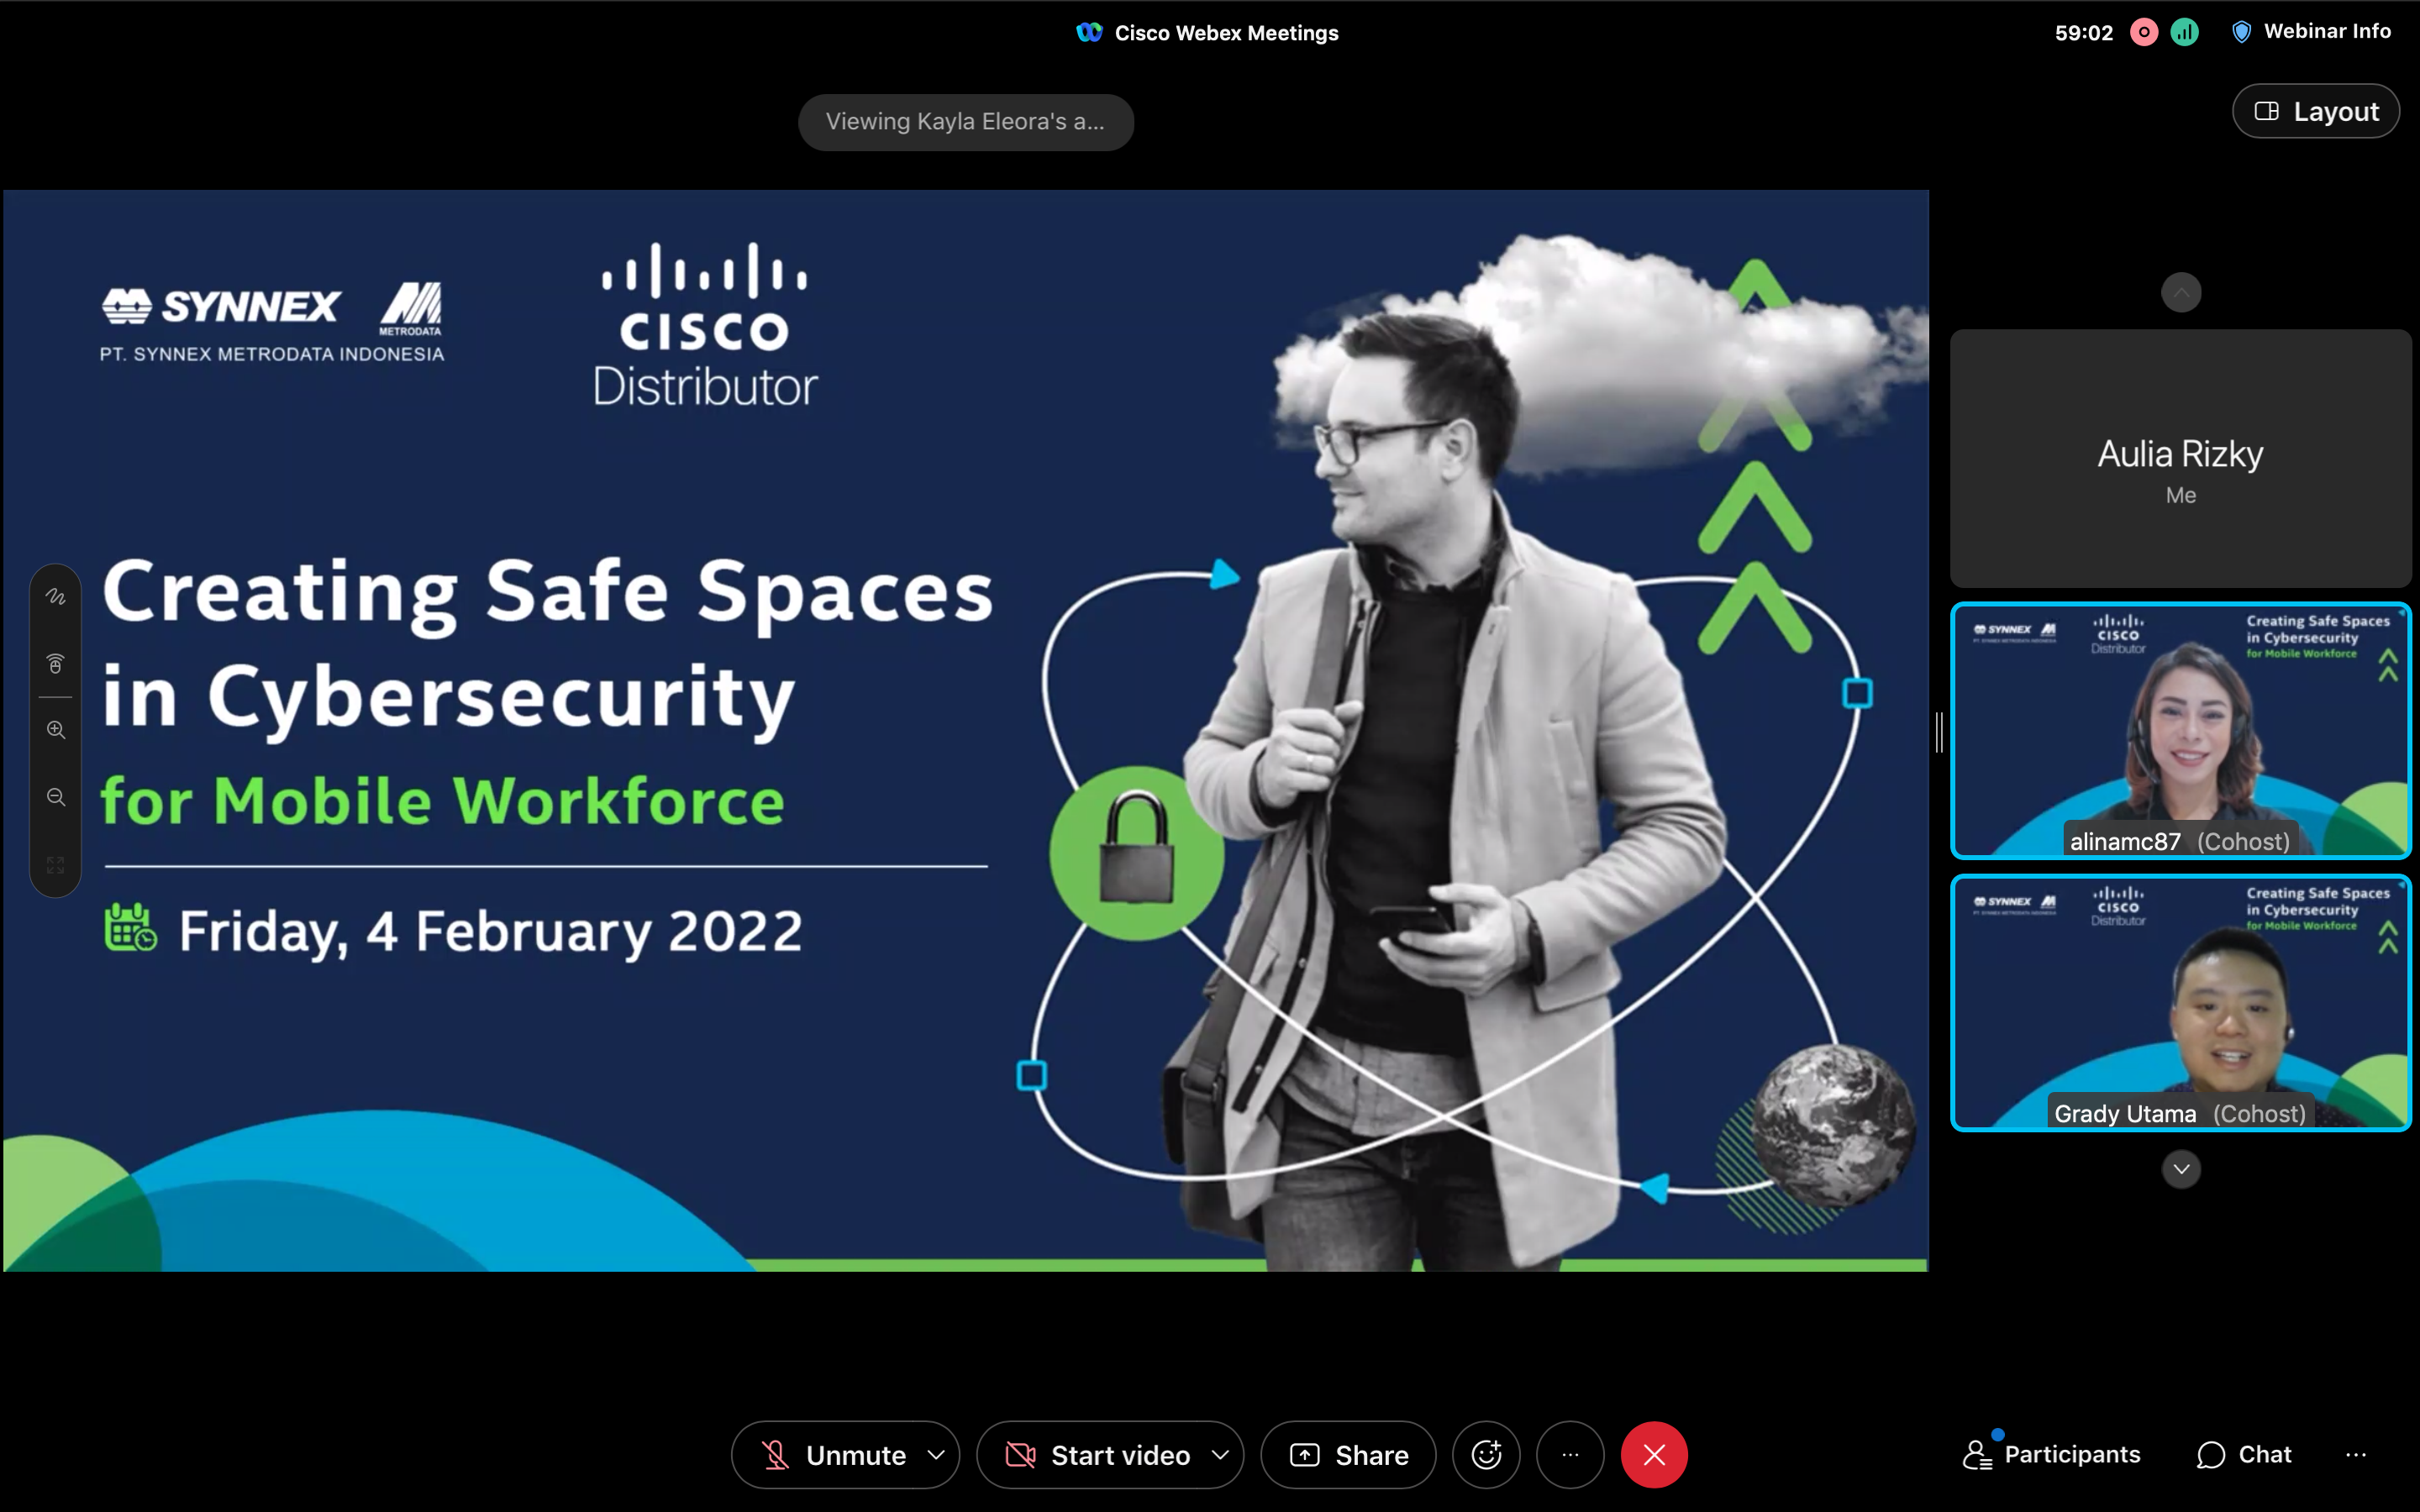 Webinar Cisco Security : Creating Safe Spaces in Cybersecurity for Mobile Workforce (4/2/22)